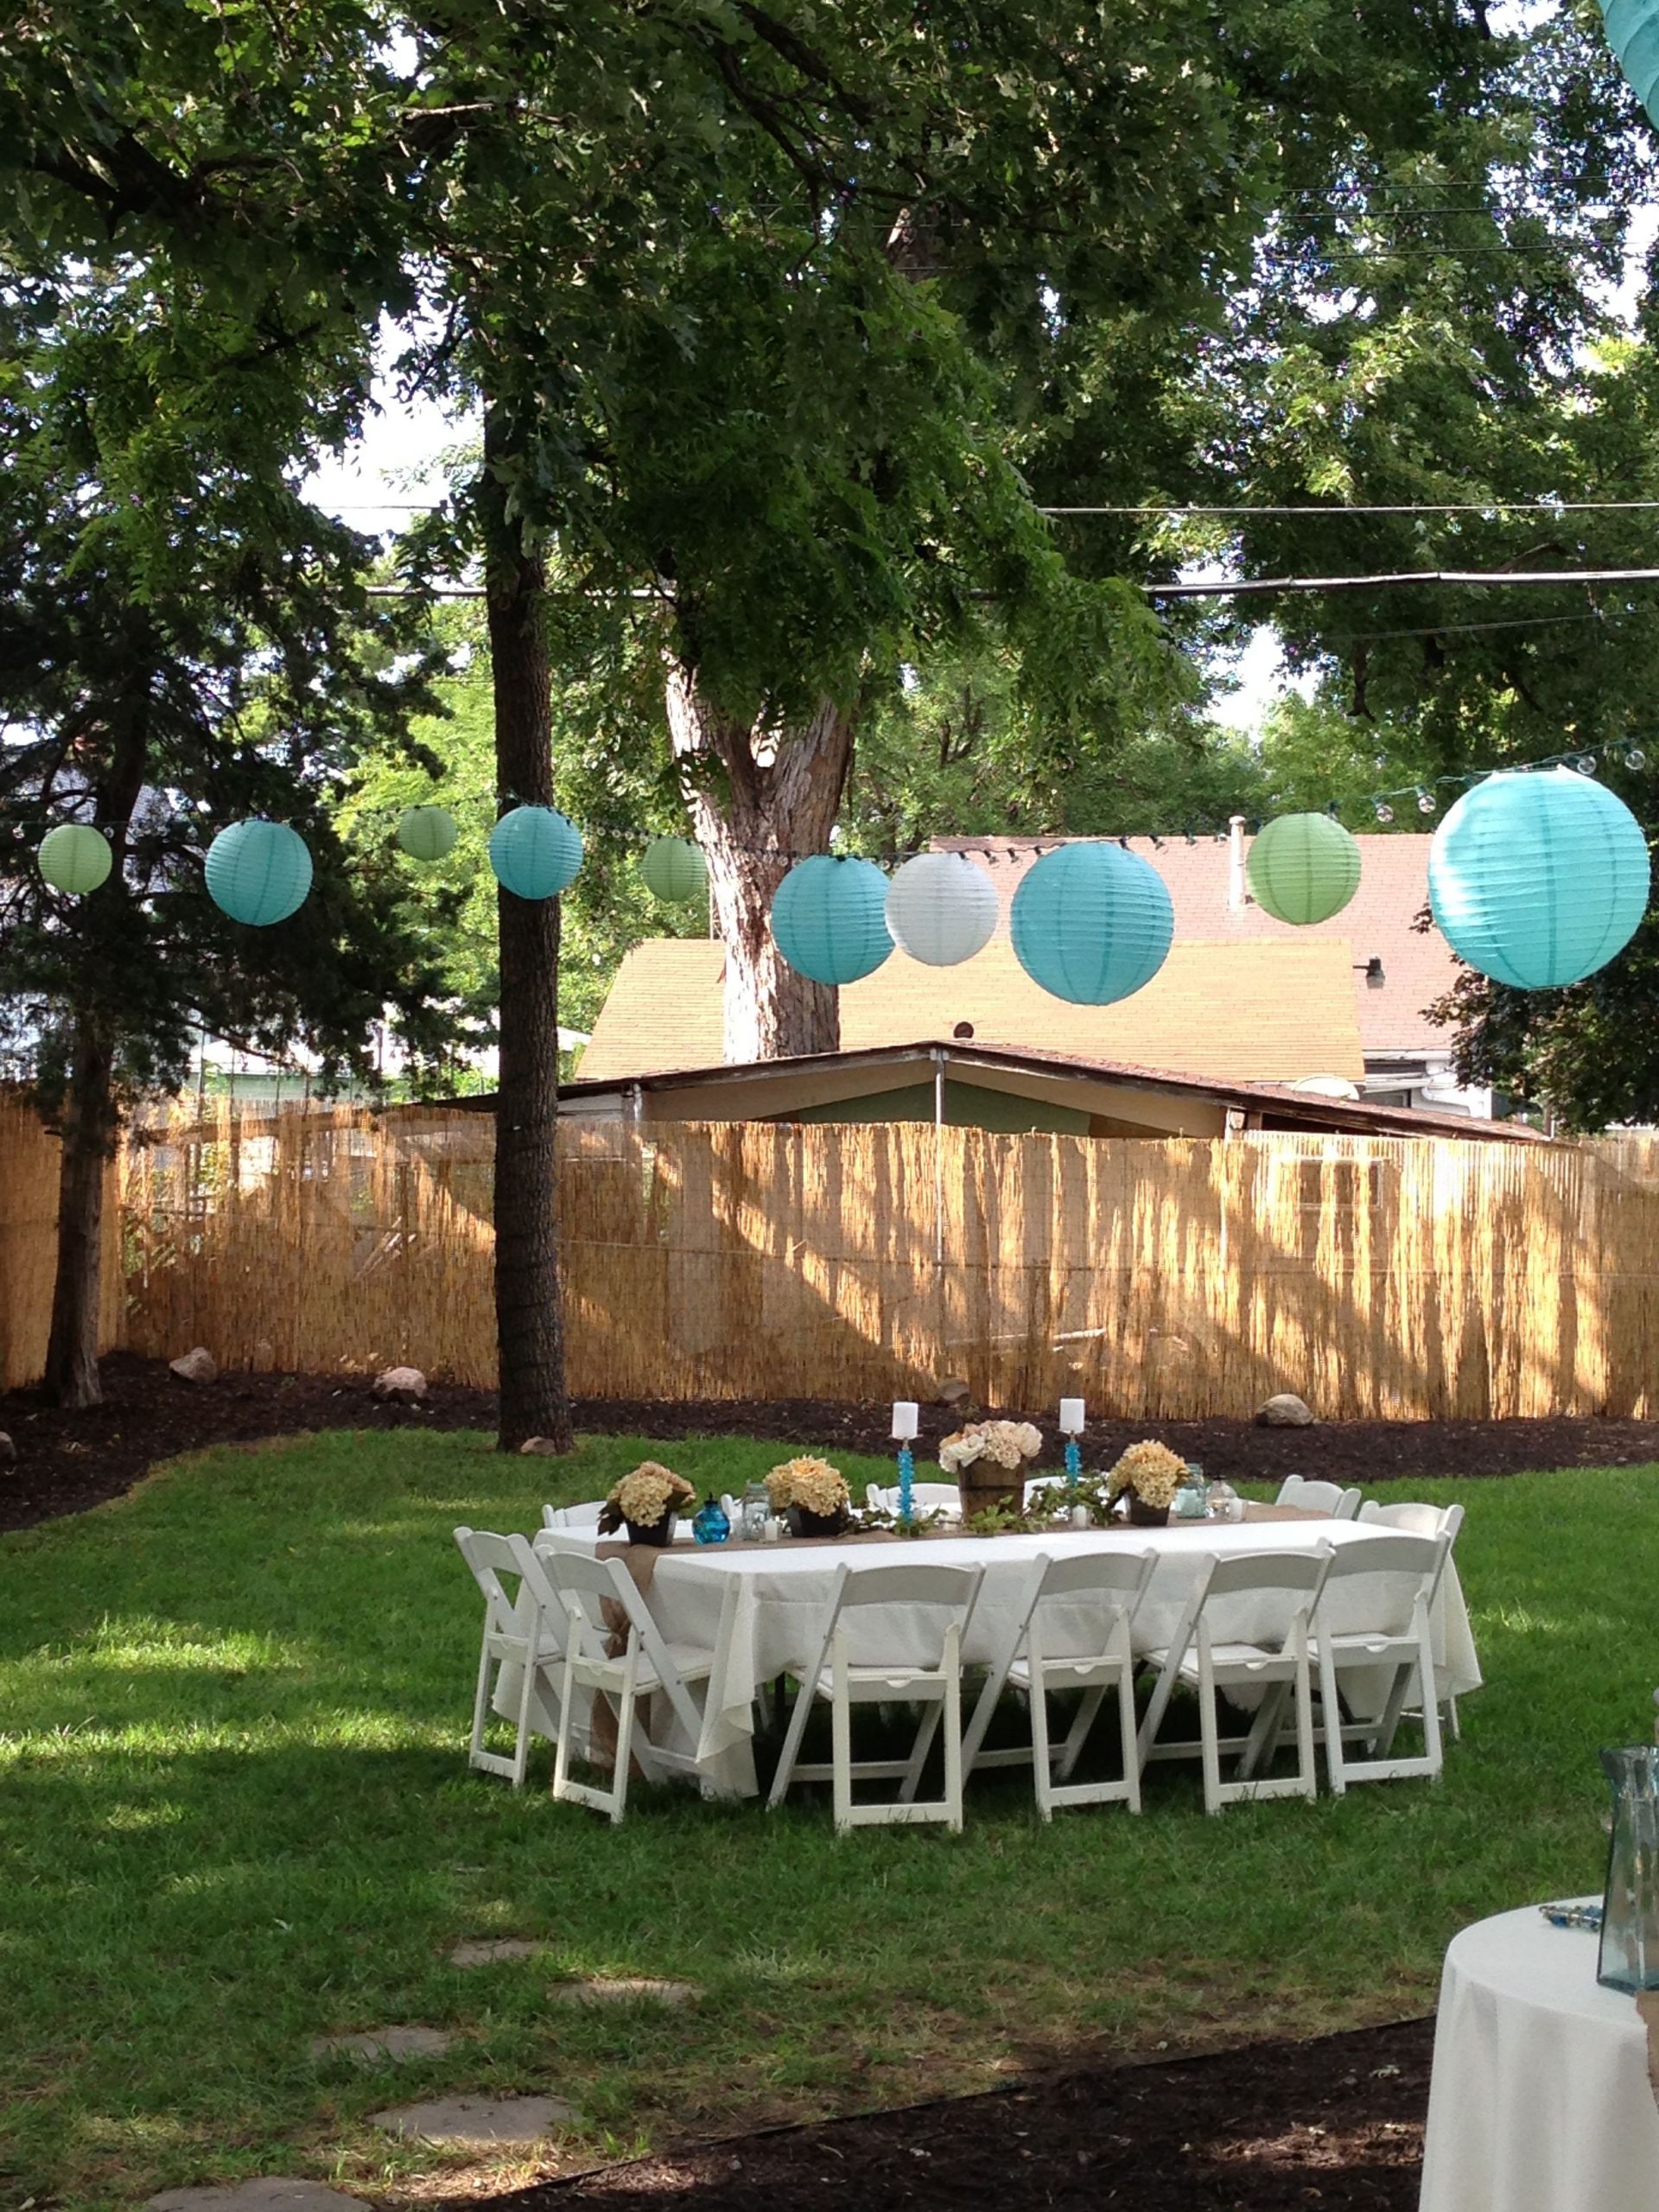 Backyard Retirement Party Ideas
 Backyard Party With images